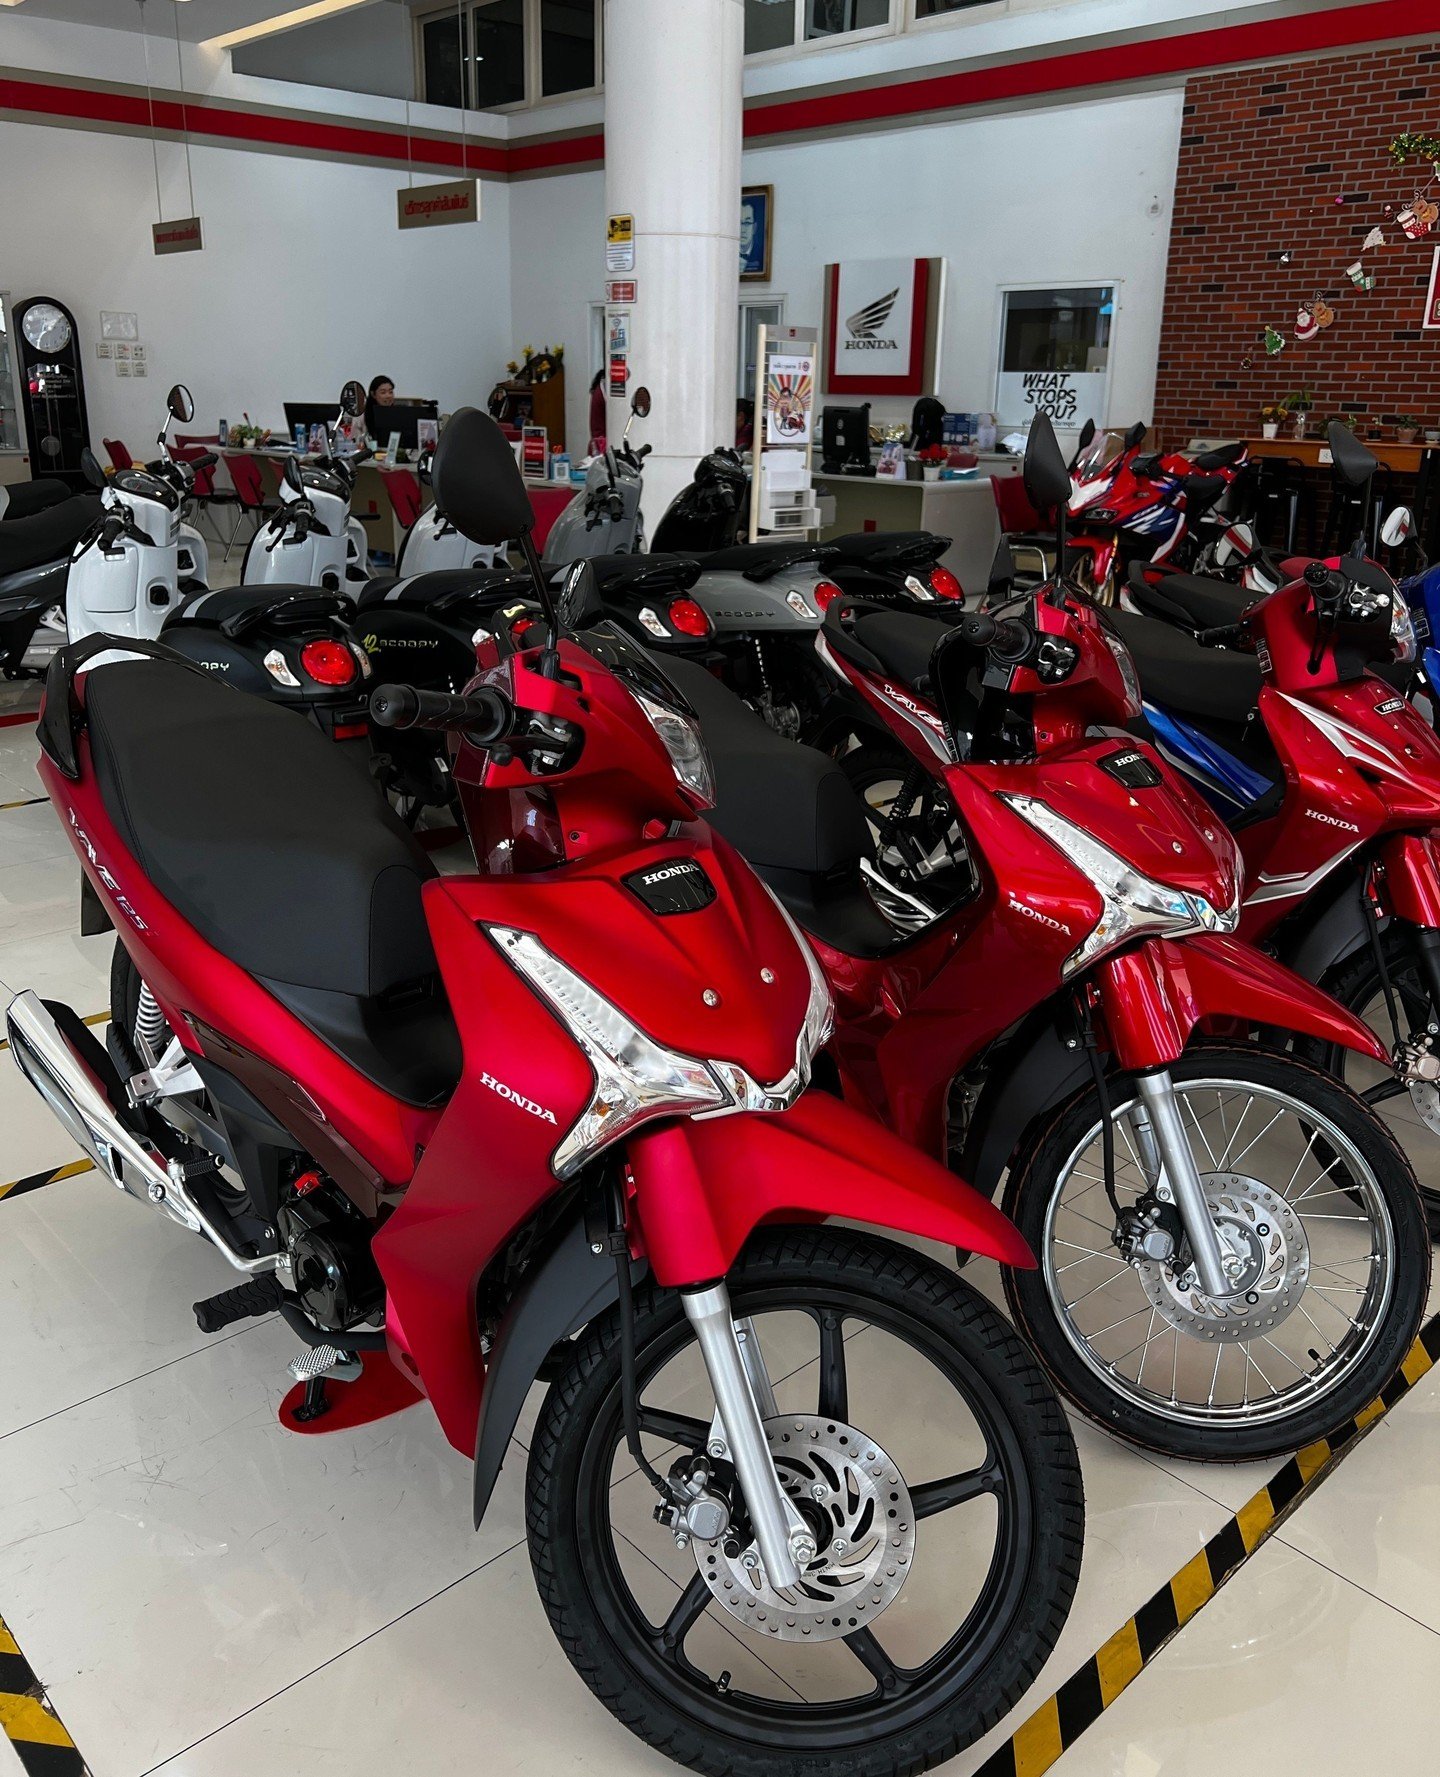 Spokes or alloy wheels. What would you choose on a brand new Honda Wave?⁠
⁠
- Small Bike Stuff